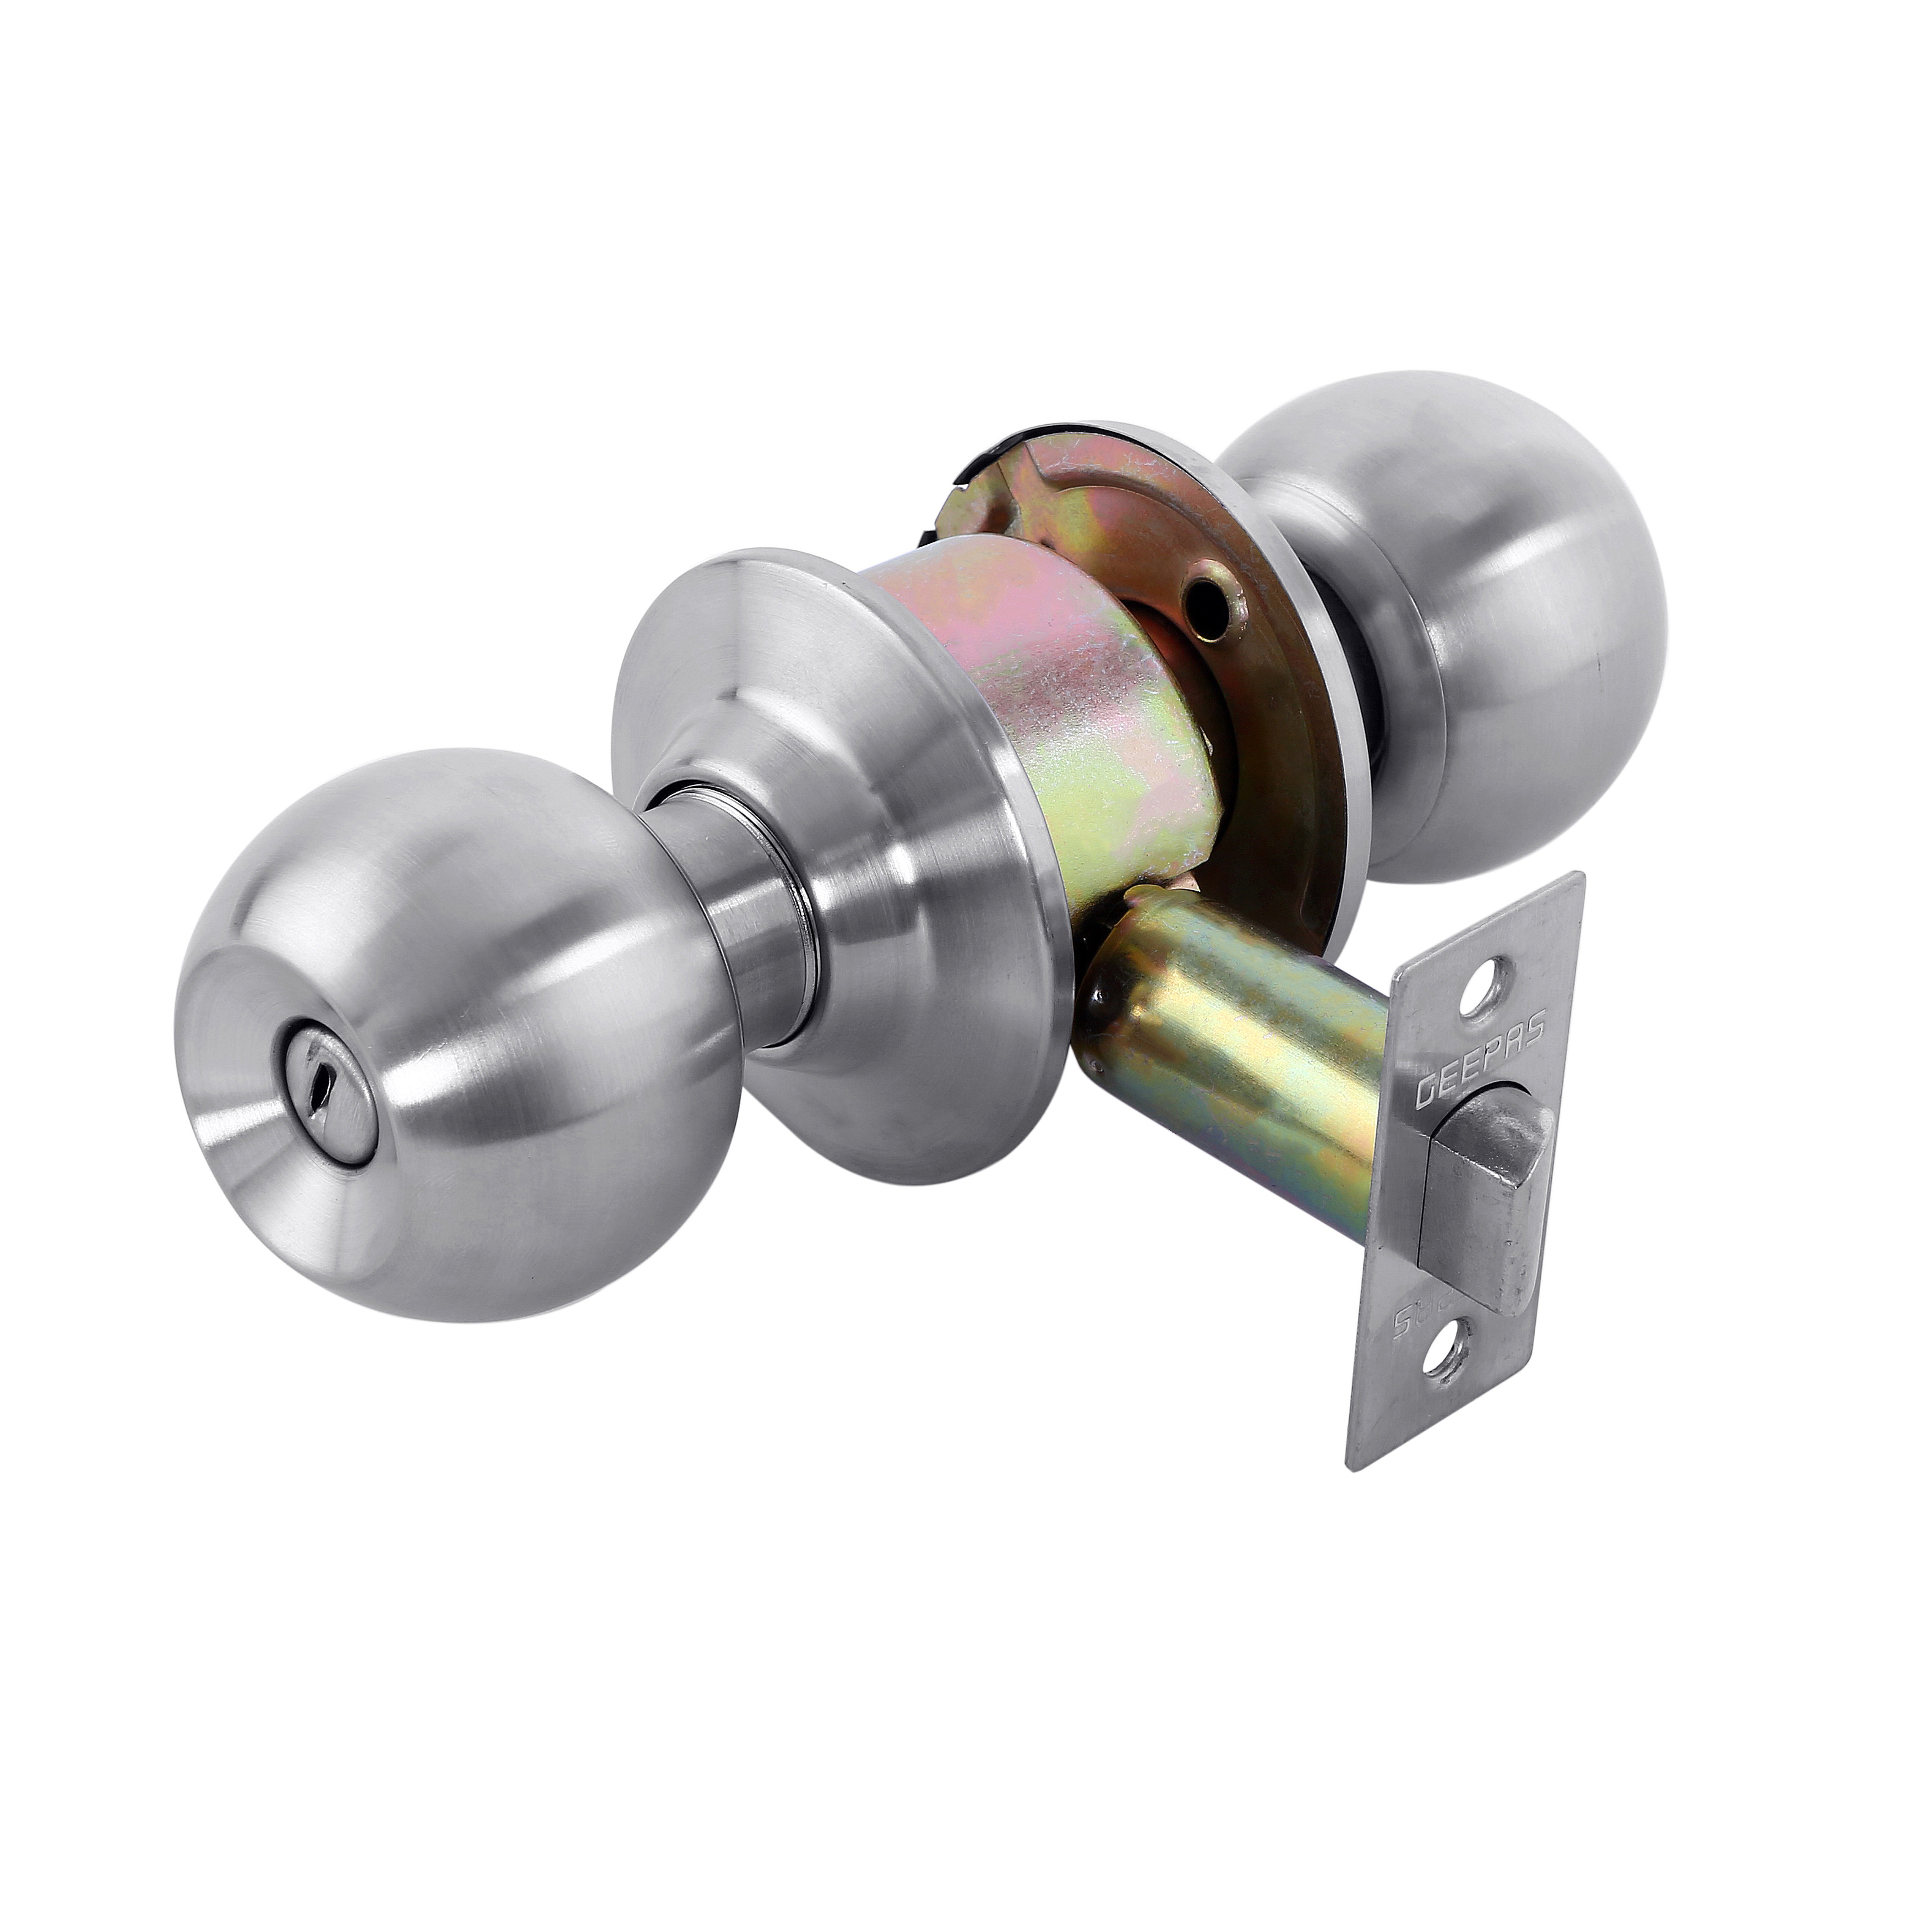 Geepas Ghw65027 Stainless Steel Cylindrical Lock - Security Lock | 53 Mm 304 Stainless Steel Knobs With Latch Bolt, Stricker &amp; Screws With Keyless Operation | Ideal For Bedroom, Bathroom And More